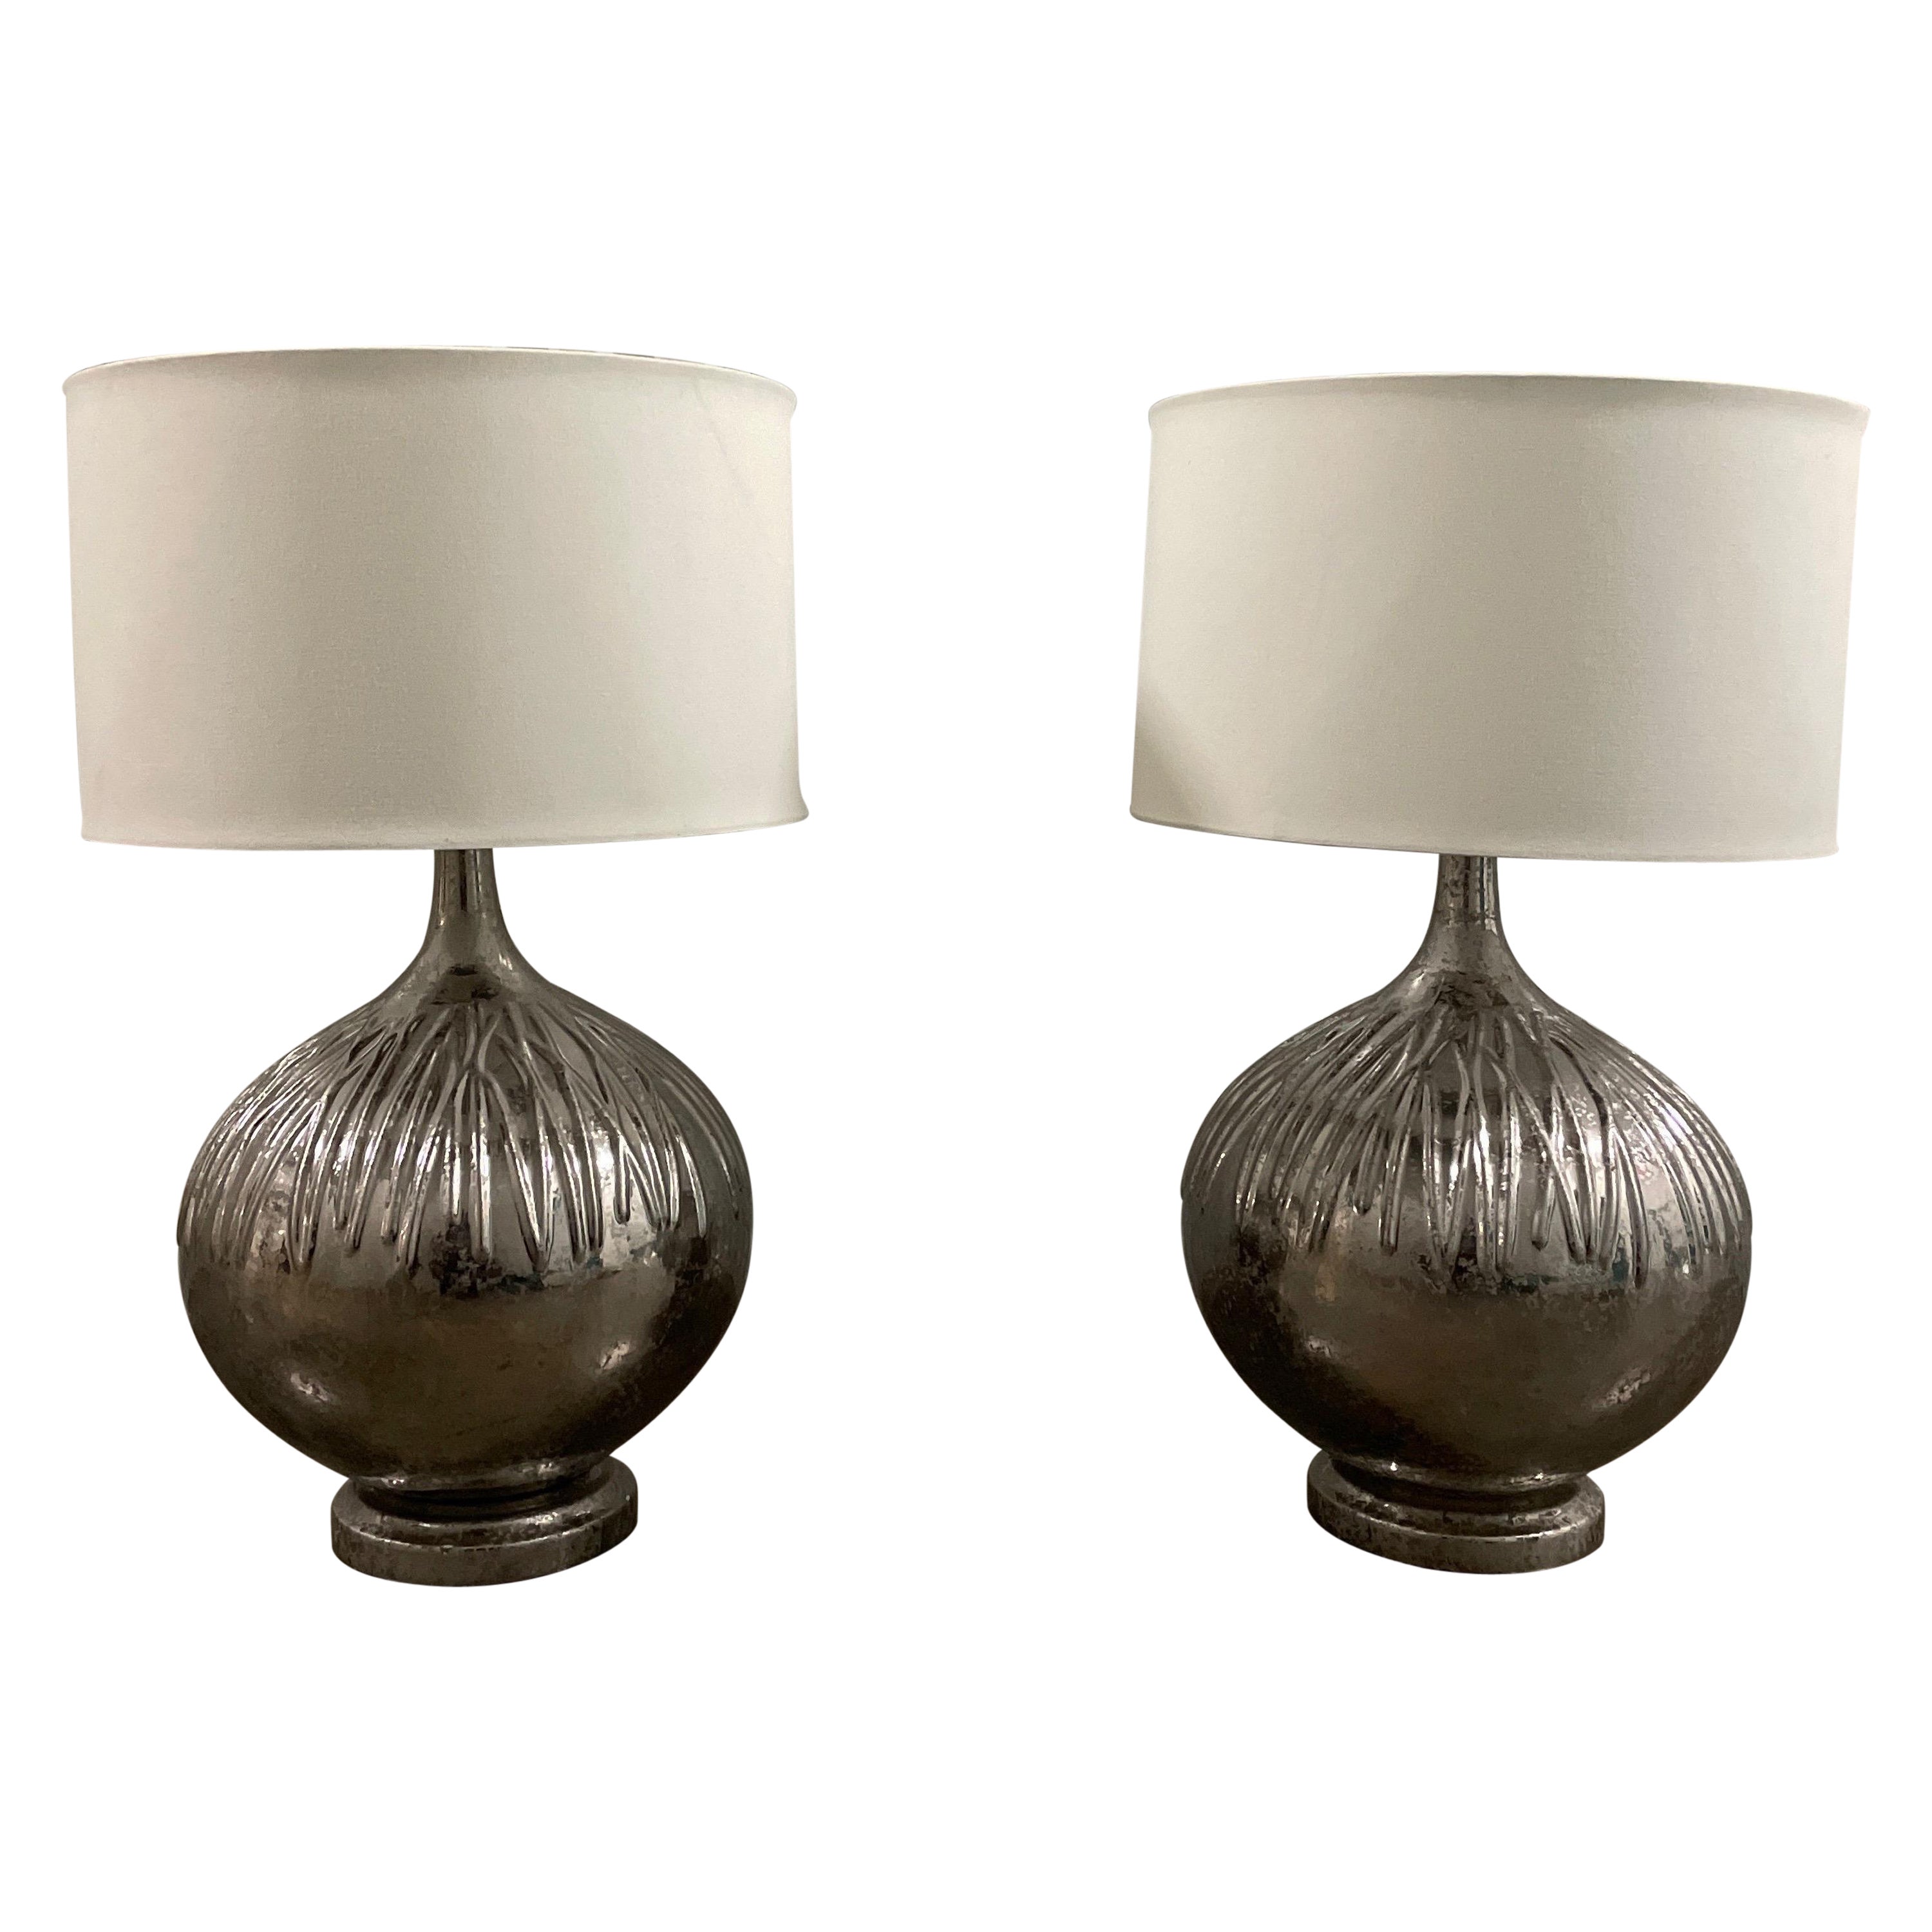 Pair of Large Scale Organic Mercury Type Glass Lamps